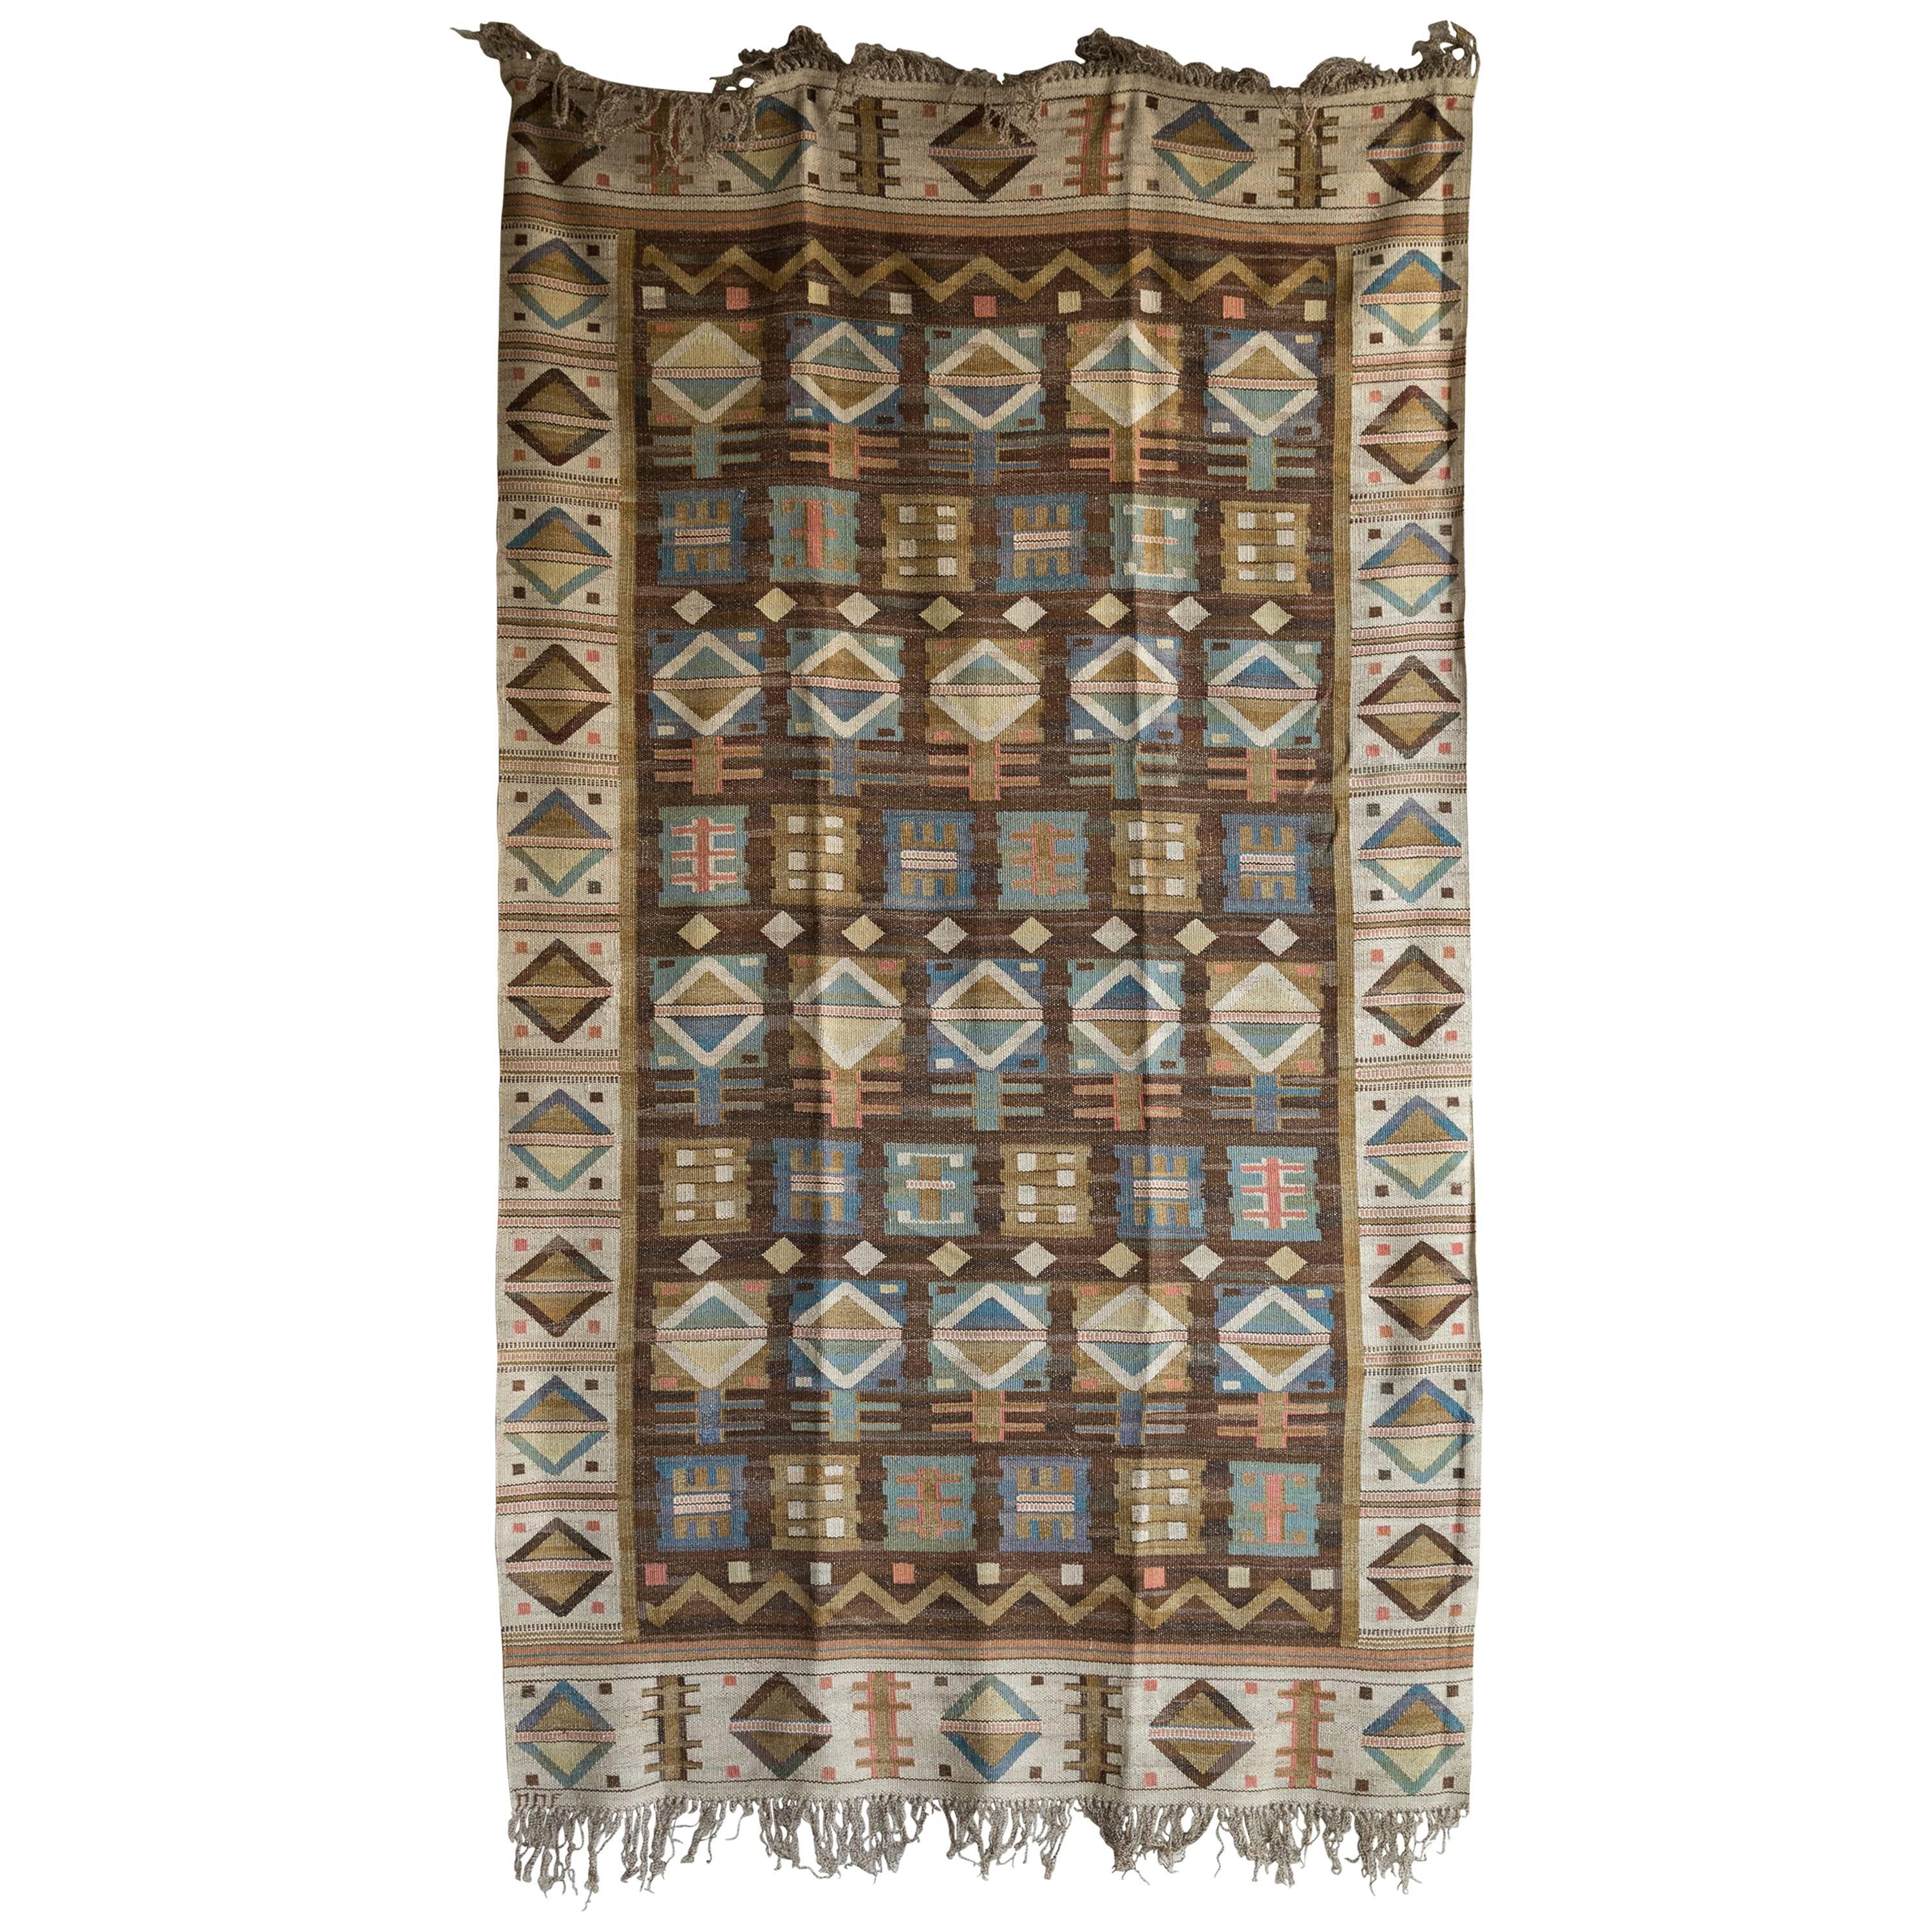 20th Century 'Renaissance' Tapestry Wall Hanging by Marta Maas-Fjetterström For Sale